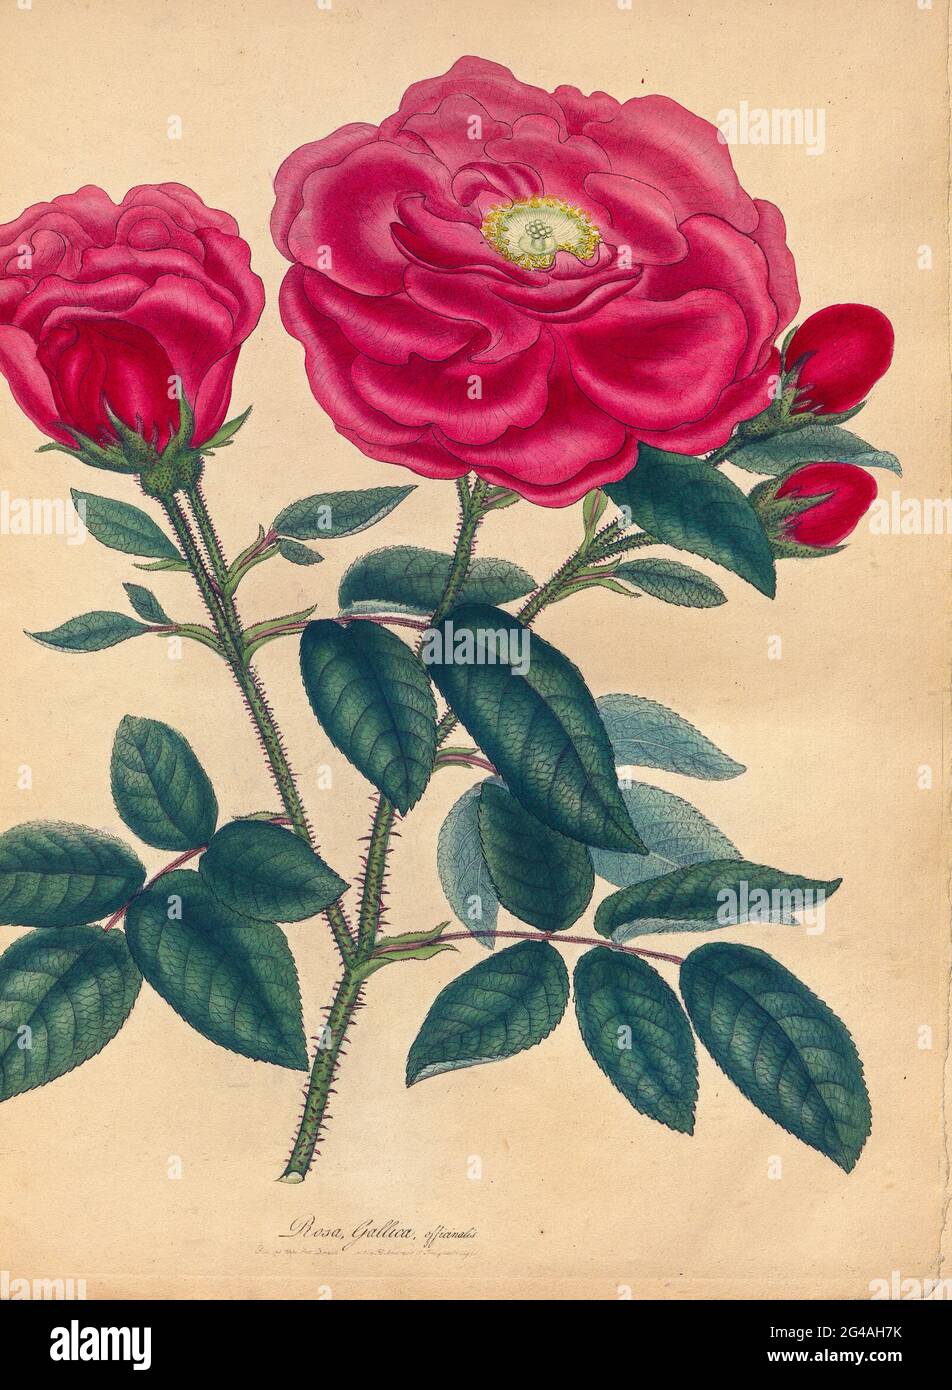 ROSA Gallica, officinalis, Officinal or French Red Rose From the book Roses, or, A monograph of the genus Rosa : containing coloured figures of all the known species and beautiful varieties, drawn, engraved, described, and coloured, from living plants. by Andrews, Henry Charles, Published in London : printed by R. Taylor and Co. ; 1805. Stock Photo